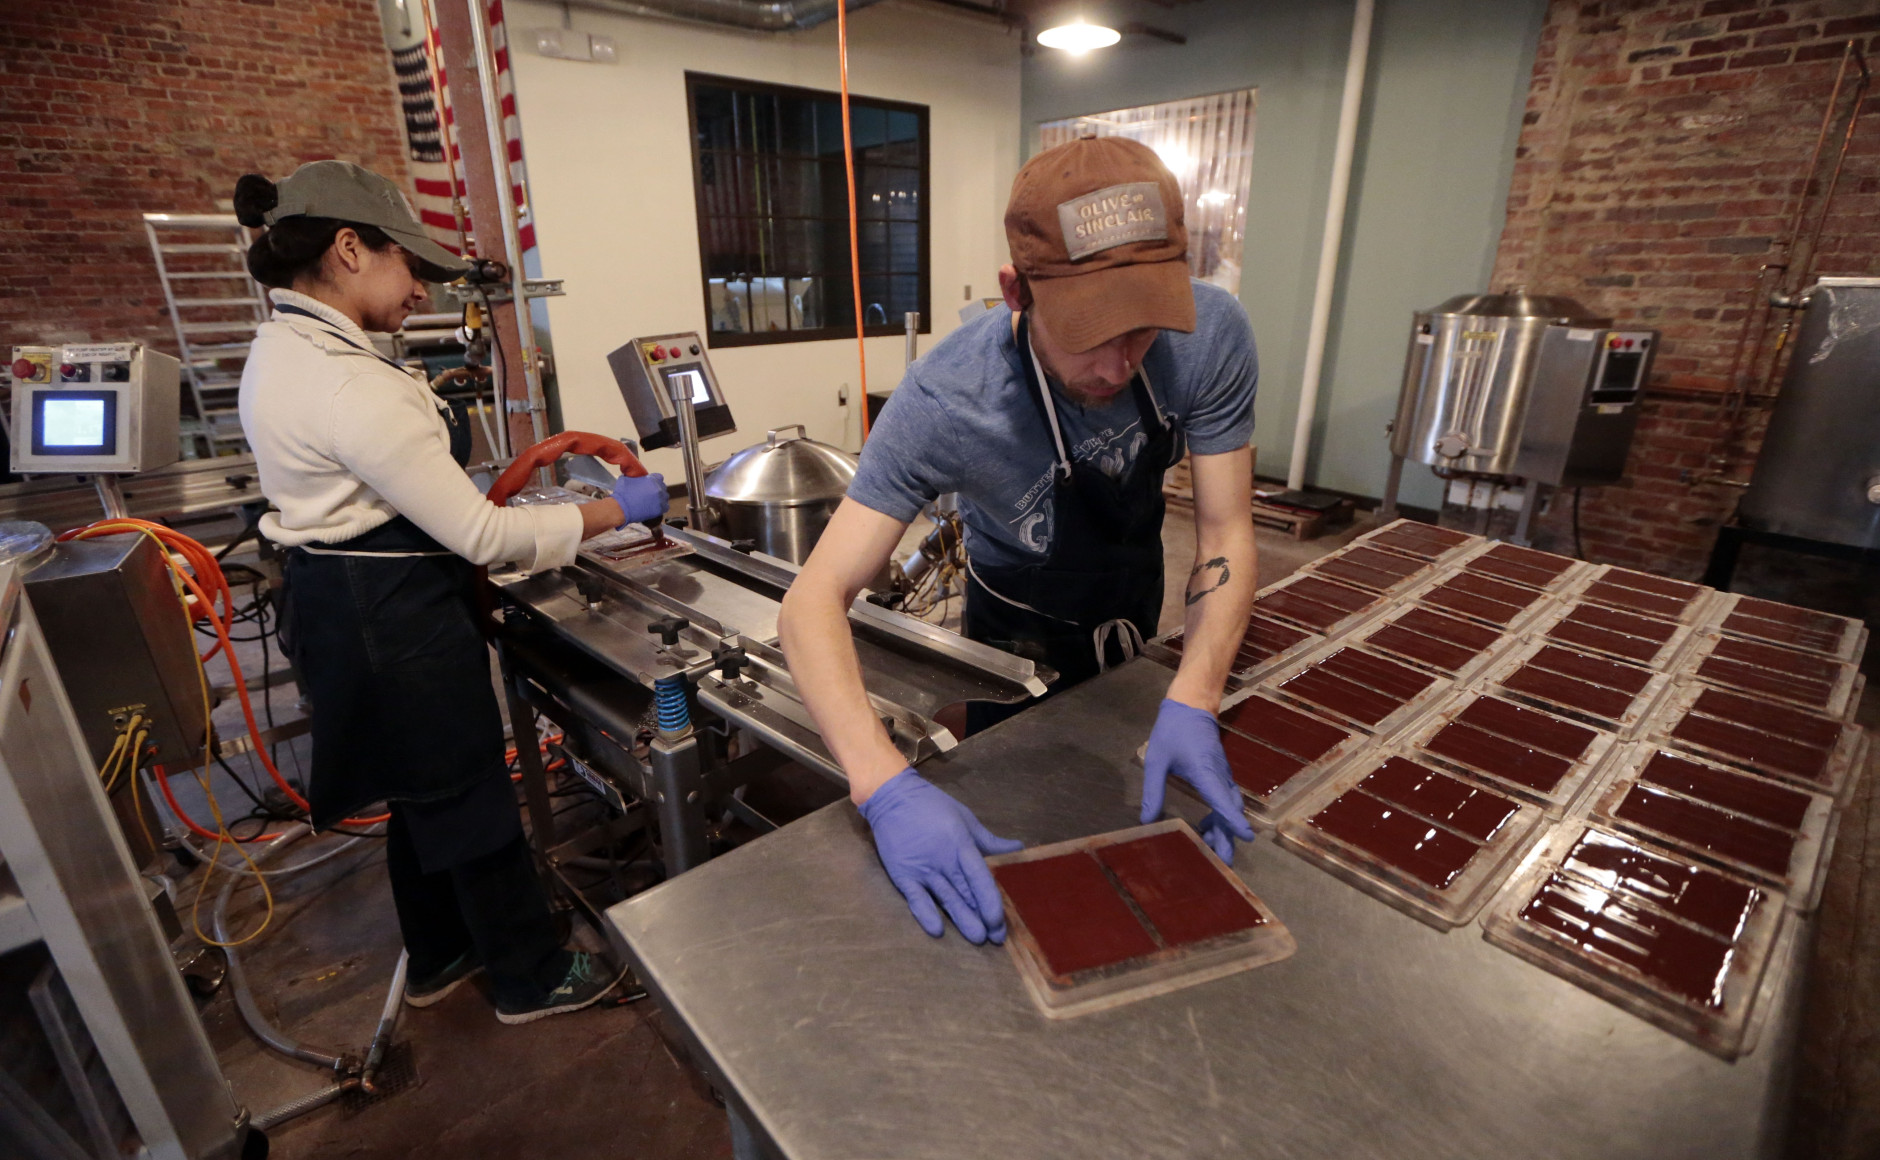 In this April 6, 2015, photo, Marta Crebilo, left, and Jason Thompson prepare chocolate molds at Olive and Sinclair Chocolate in the East Nashville area of Nashville, Tenn. The East Nashville neighborhood houses an eclectic collection of restaurants, bars, coffee shops, bakeries and stores, mixed into a residential area of 1950s and 1960s homes. (AP Photo/Mark Humphrey)